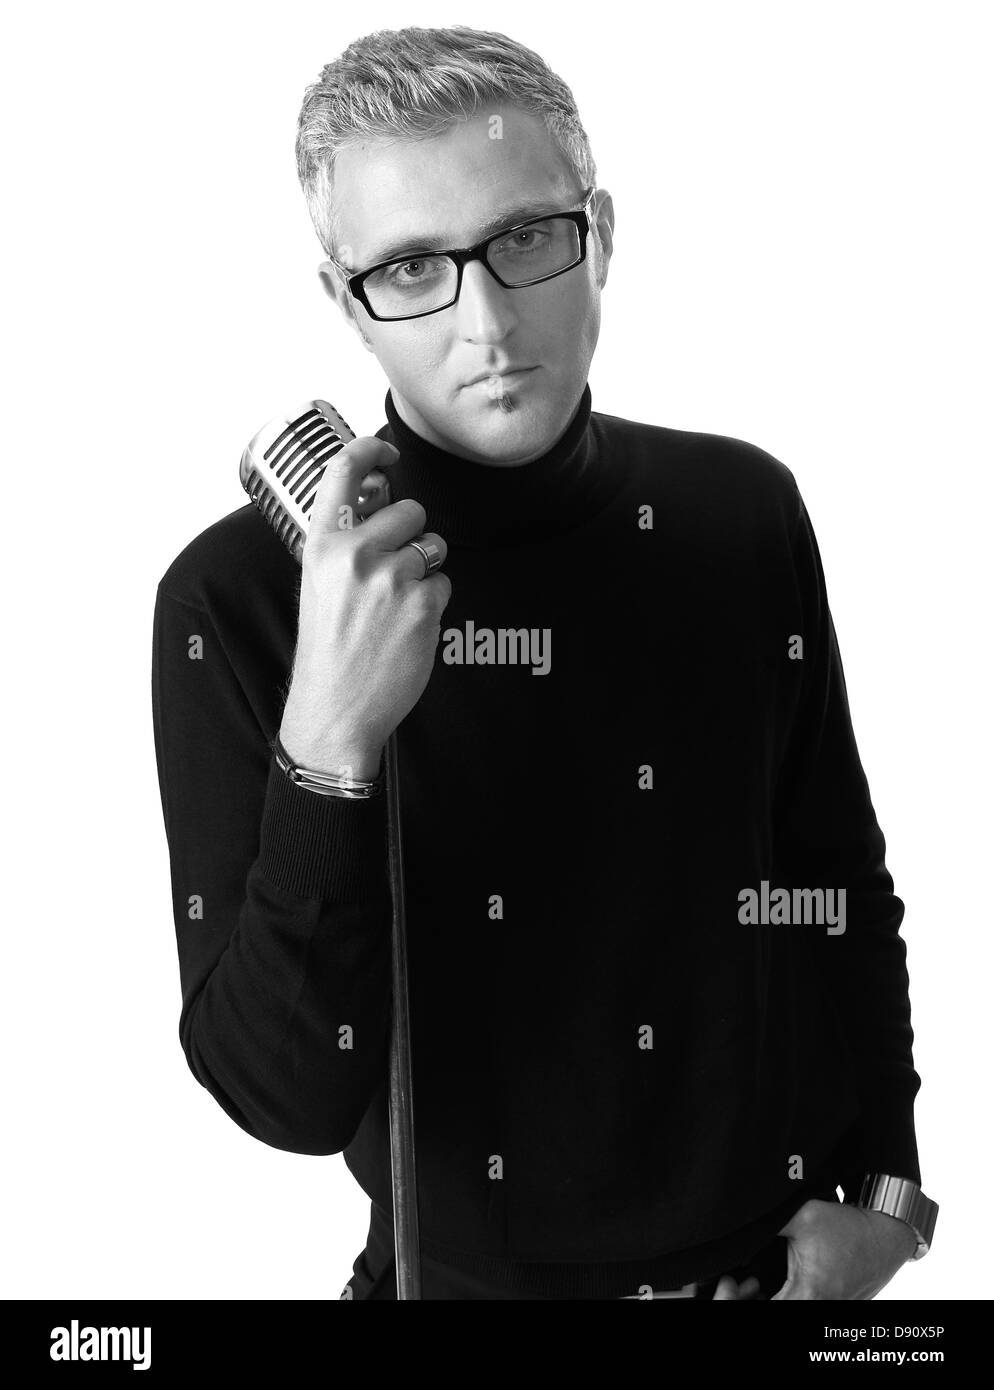 Stylish young man posing with old-fashioned microphone Stock Photo